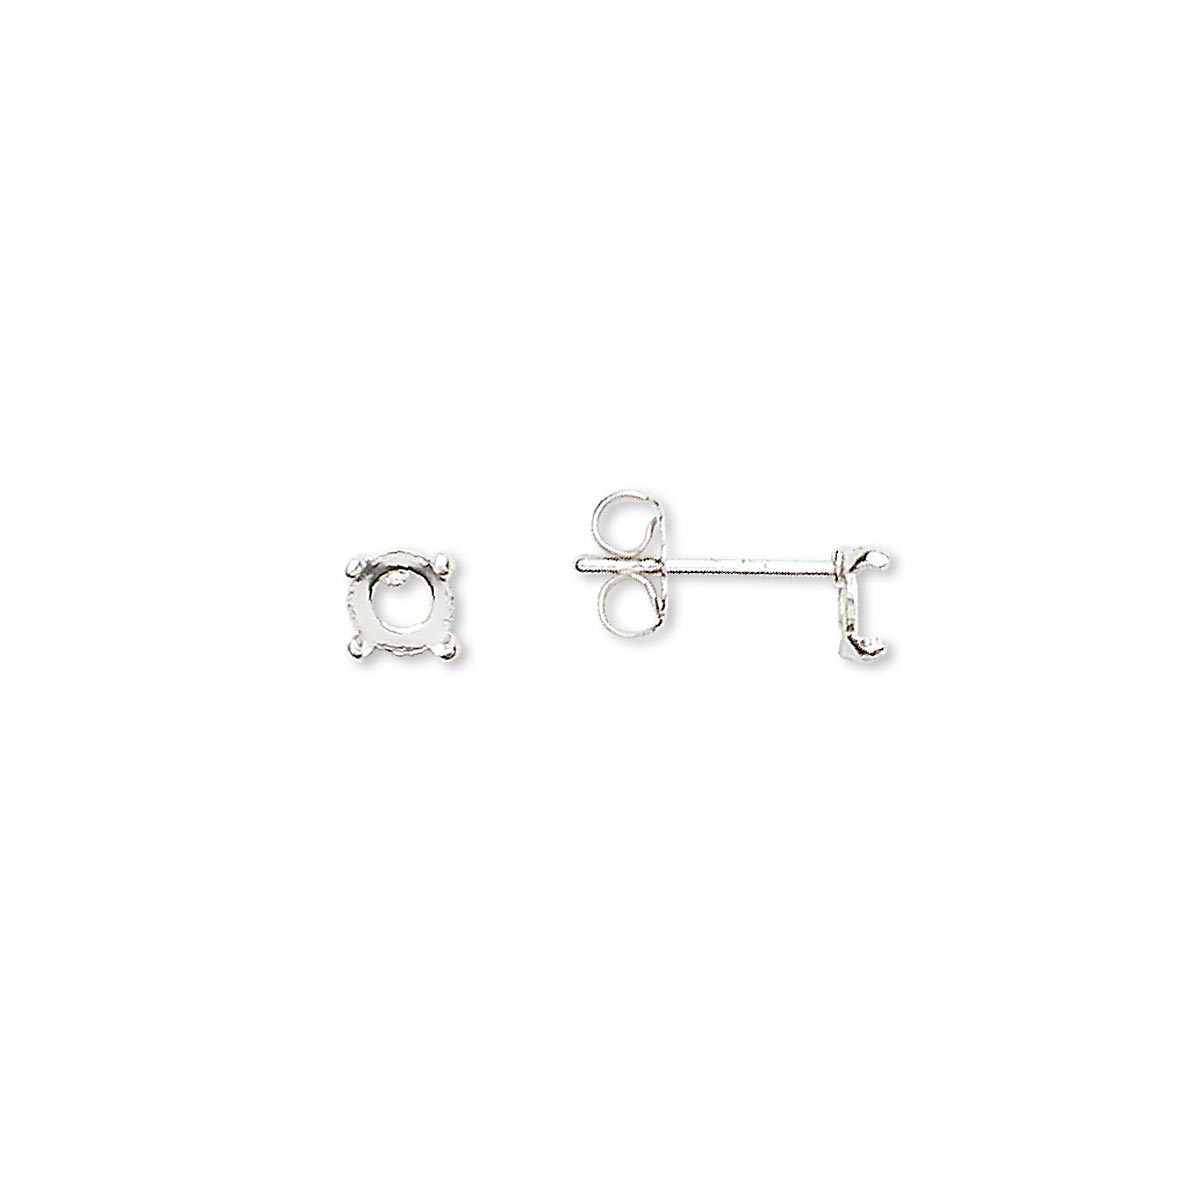 Earstud, Cab-Tite™, sterling silver, 4mm 4-prong round setting. Sold ...